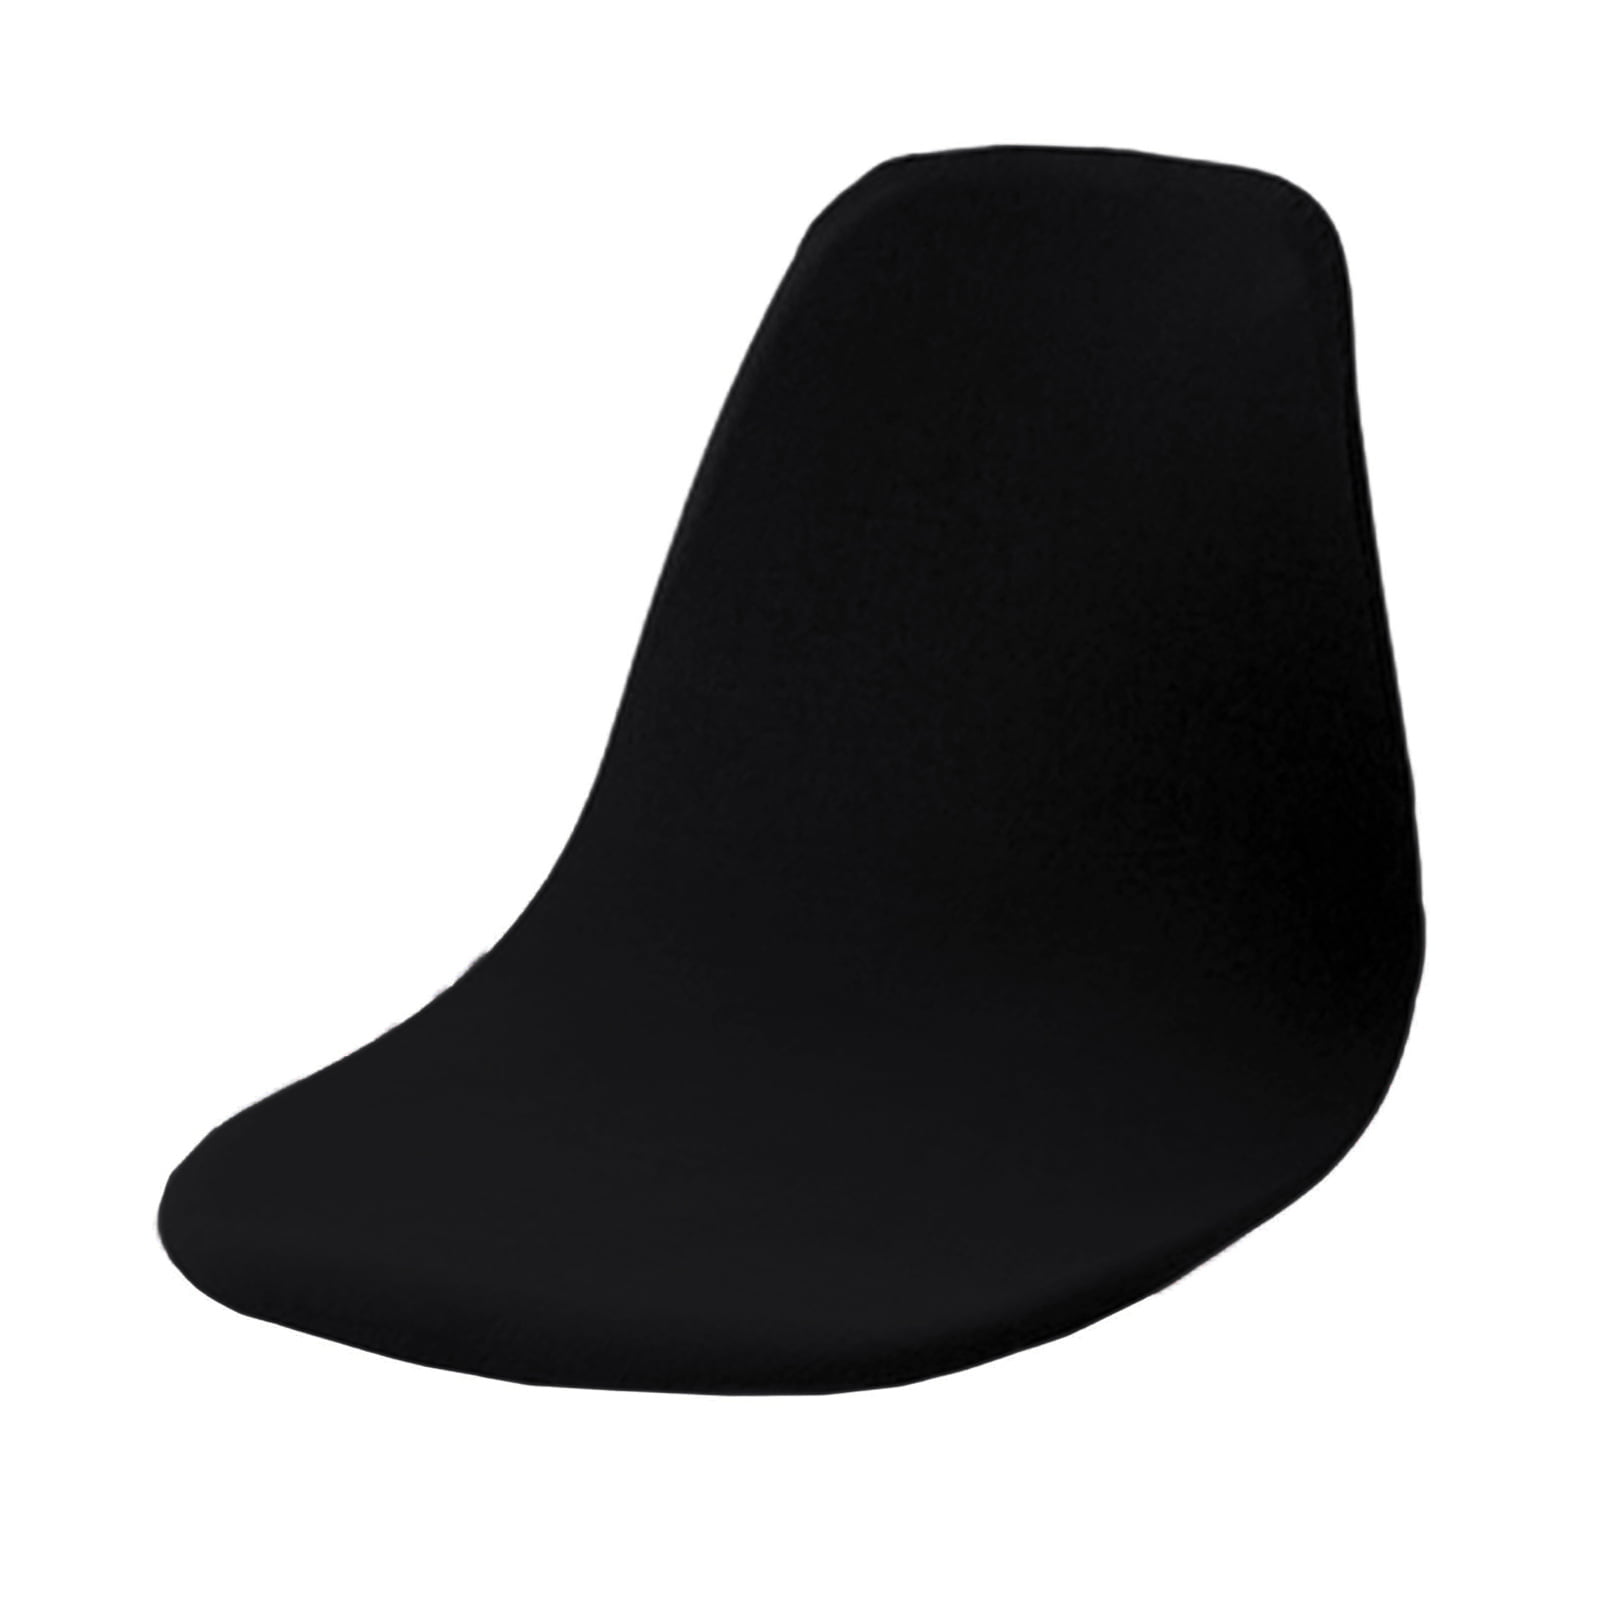 Details about   Shell Chair Seat Cover Washable Chair Cover Dinners Slipcover Soft Polyester 